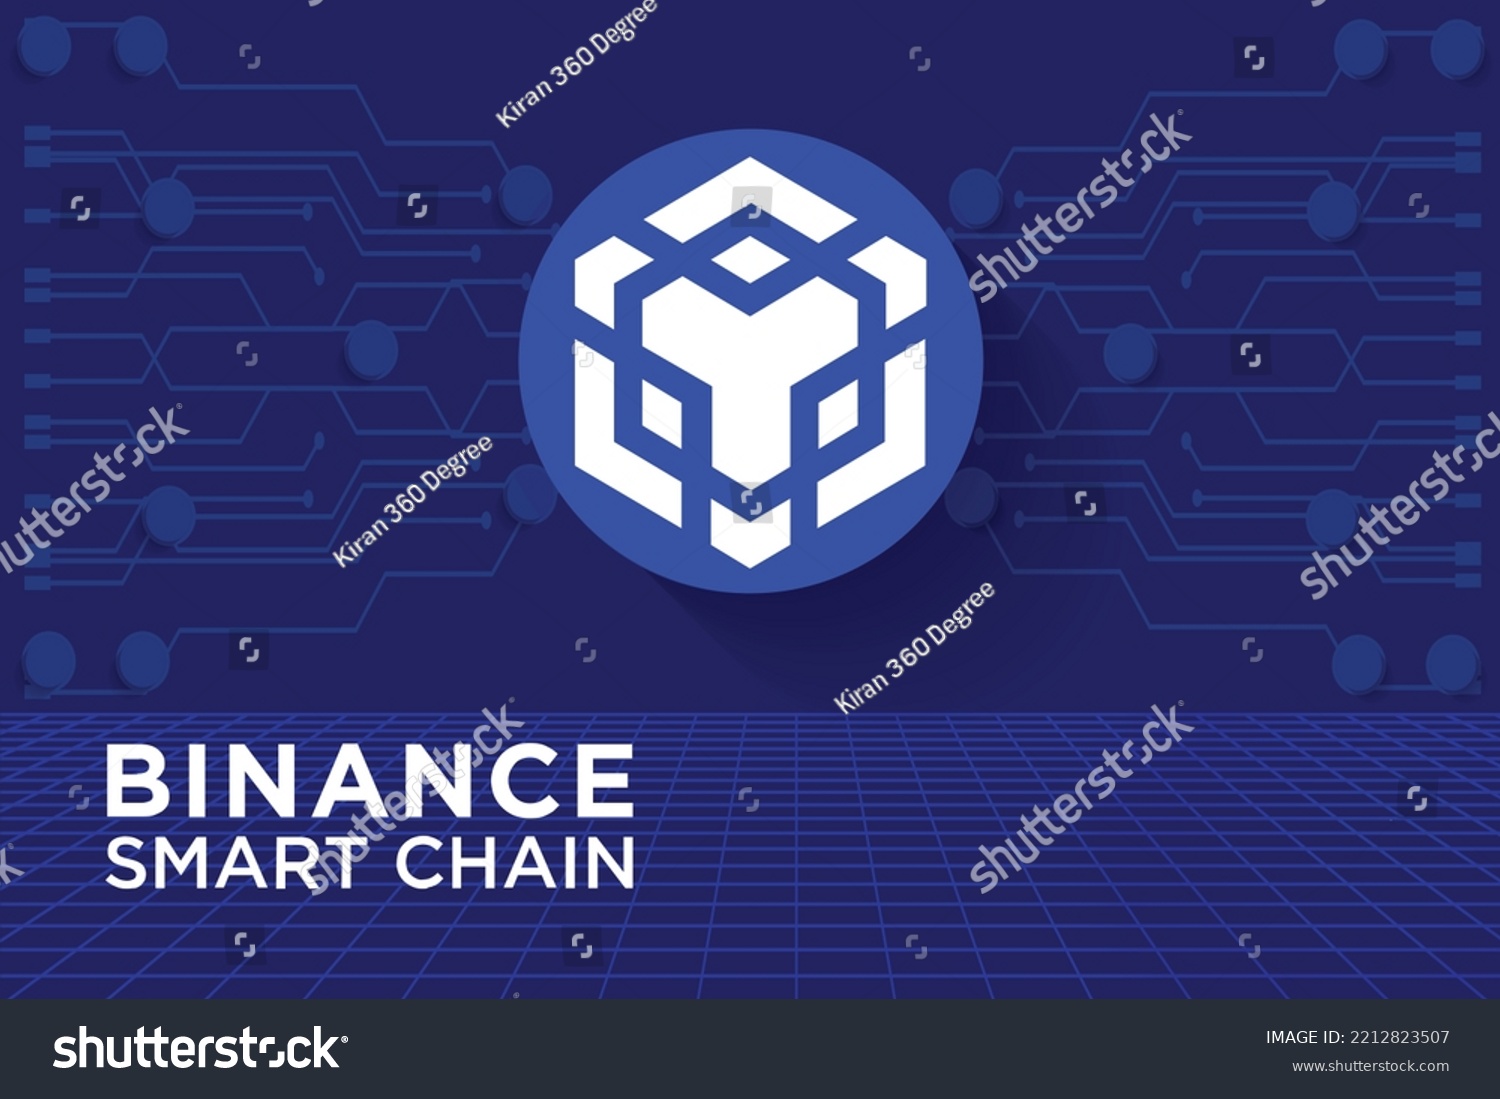 SVG of Binance Smart Chain EVM-compatible programmability and native cross-chain vector illustration block chain based symbol and logo on futuristic digital background. Decentralized money technology. svg